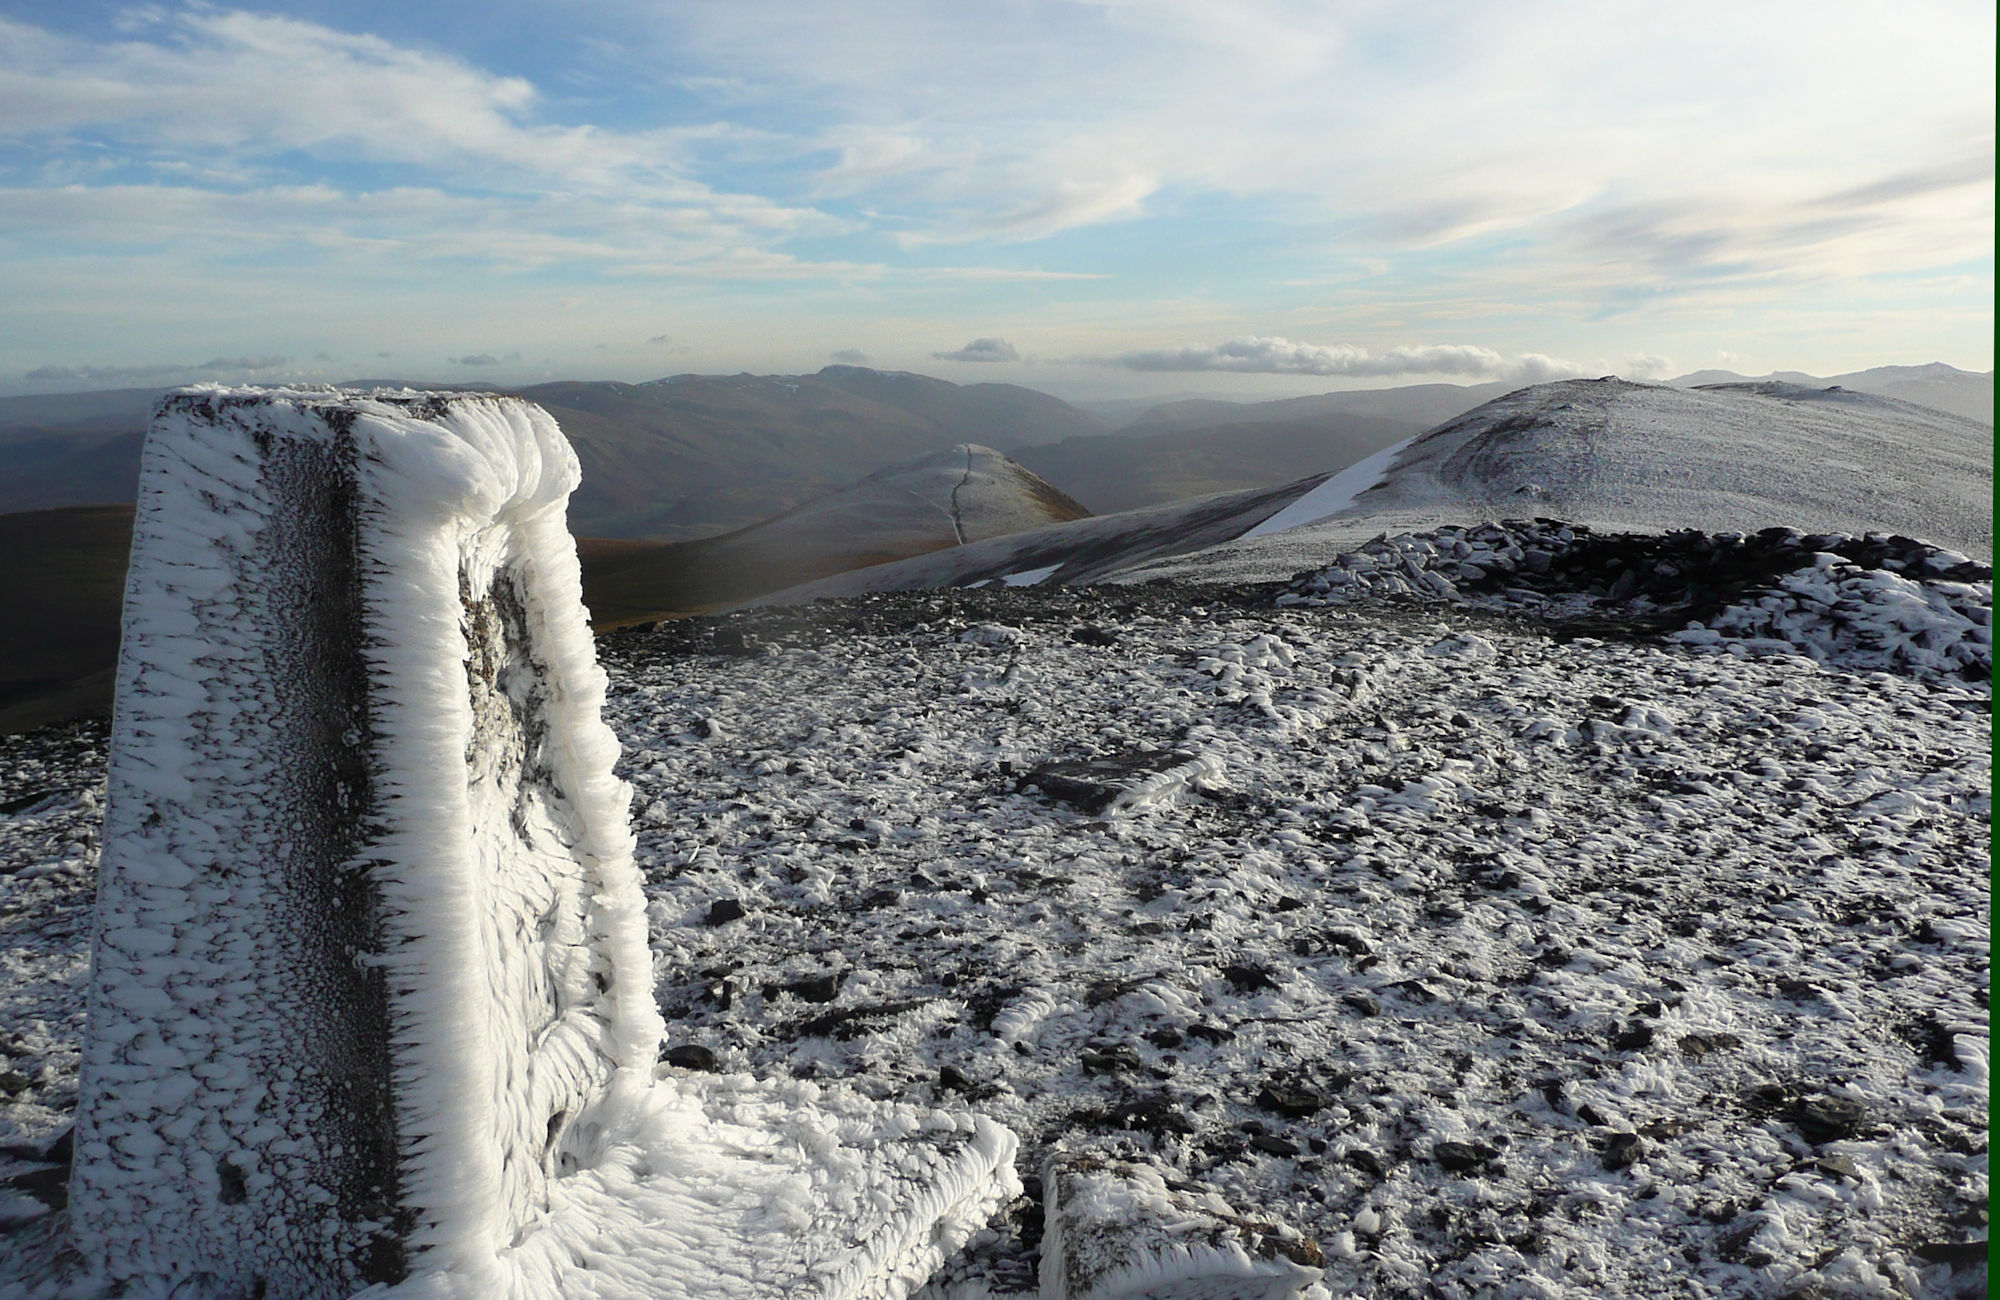 Summit of Skiddaw looking south east